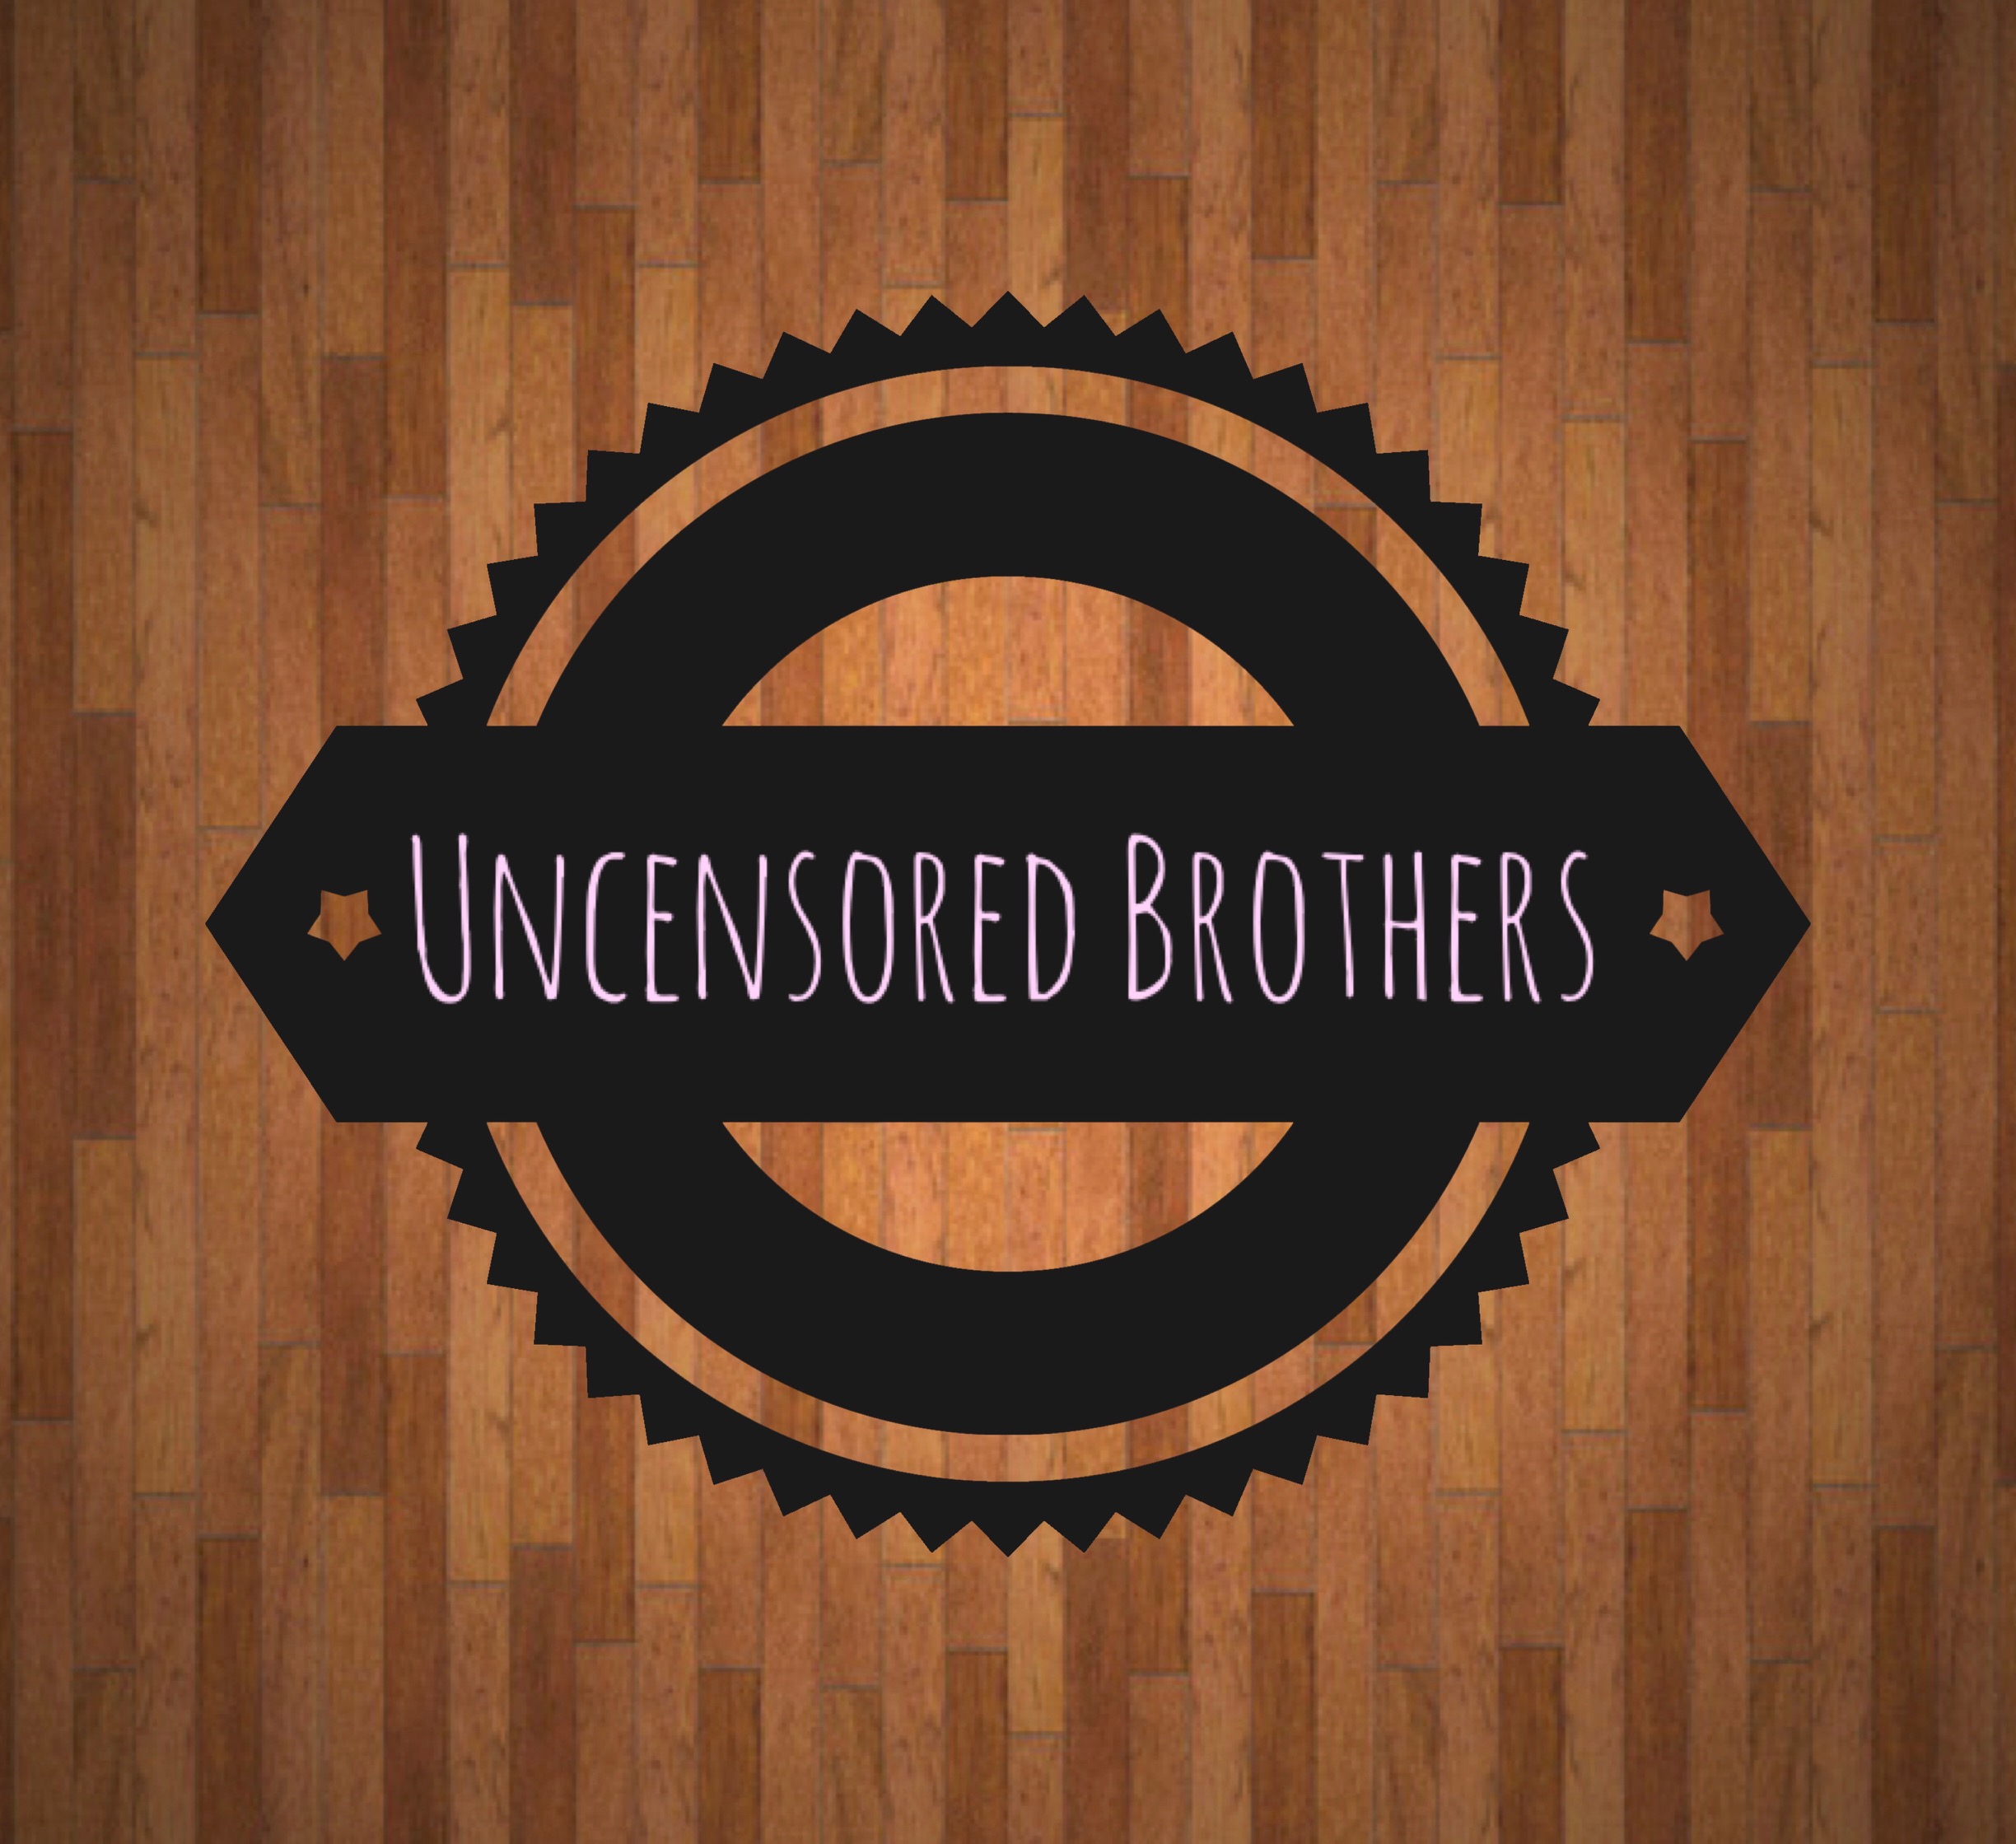 Uncensored Brothers (Episode 4)